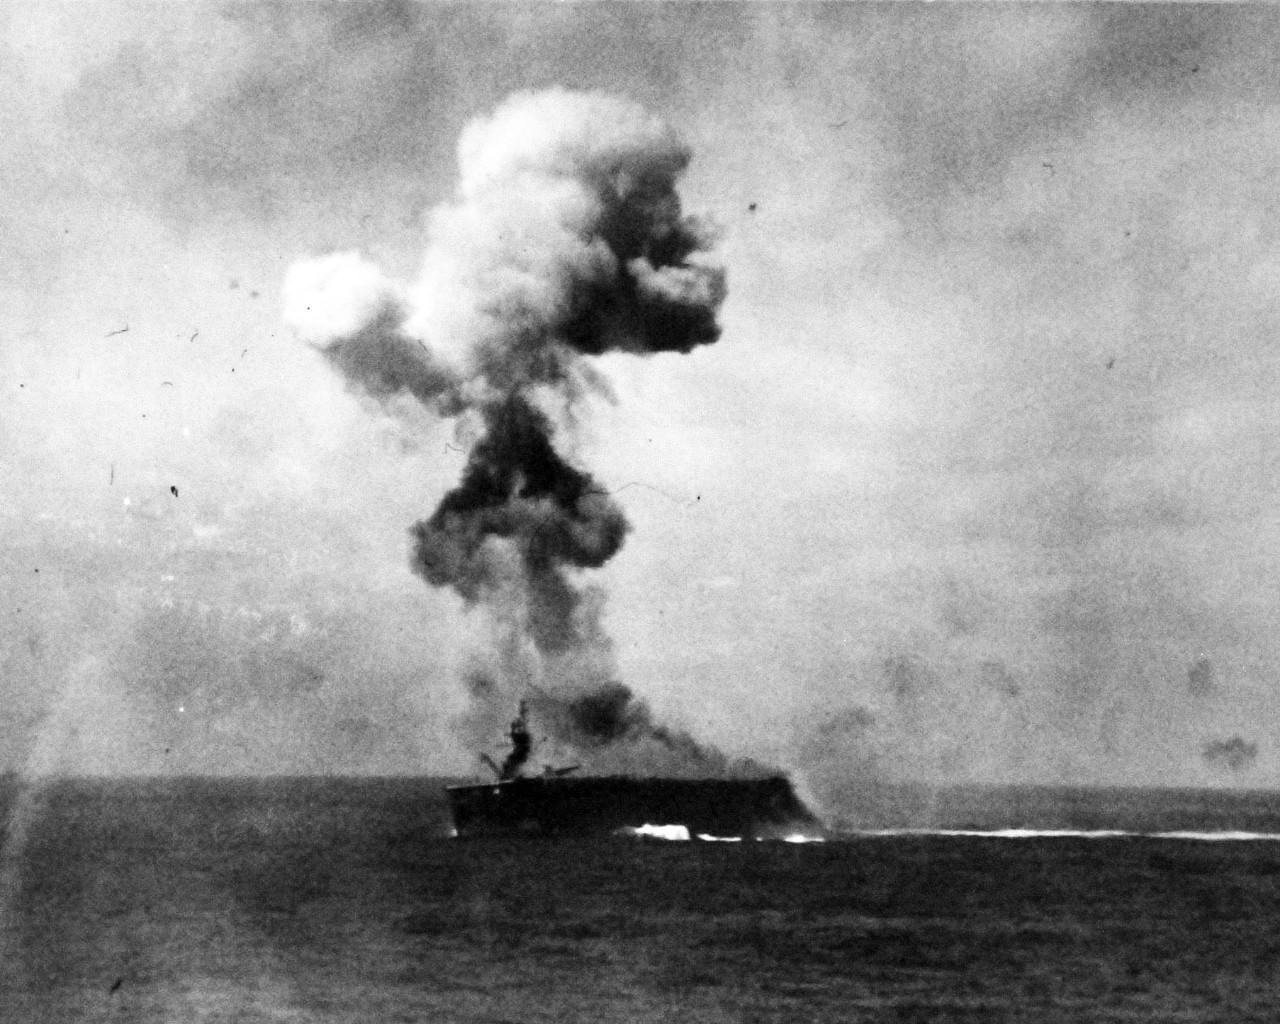 The USS Cabot (CVL-28) shortly after being hit by a Kamikaze attack on November 25, 1944. Alden Wadleigh, who was on the flight deck at the time of the attack, visited Naval Air Station Pensacola on July 27, 2022. Photo from the National Museum of the U.S. Navy.